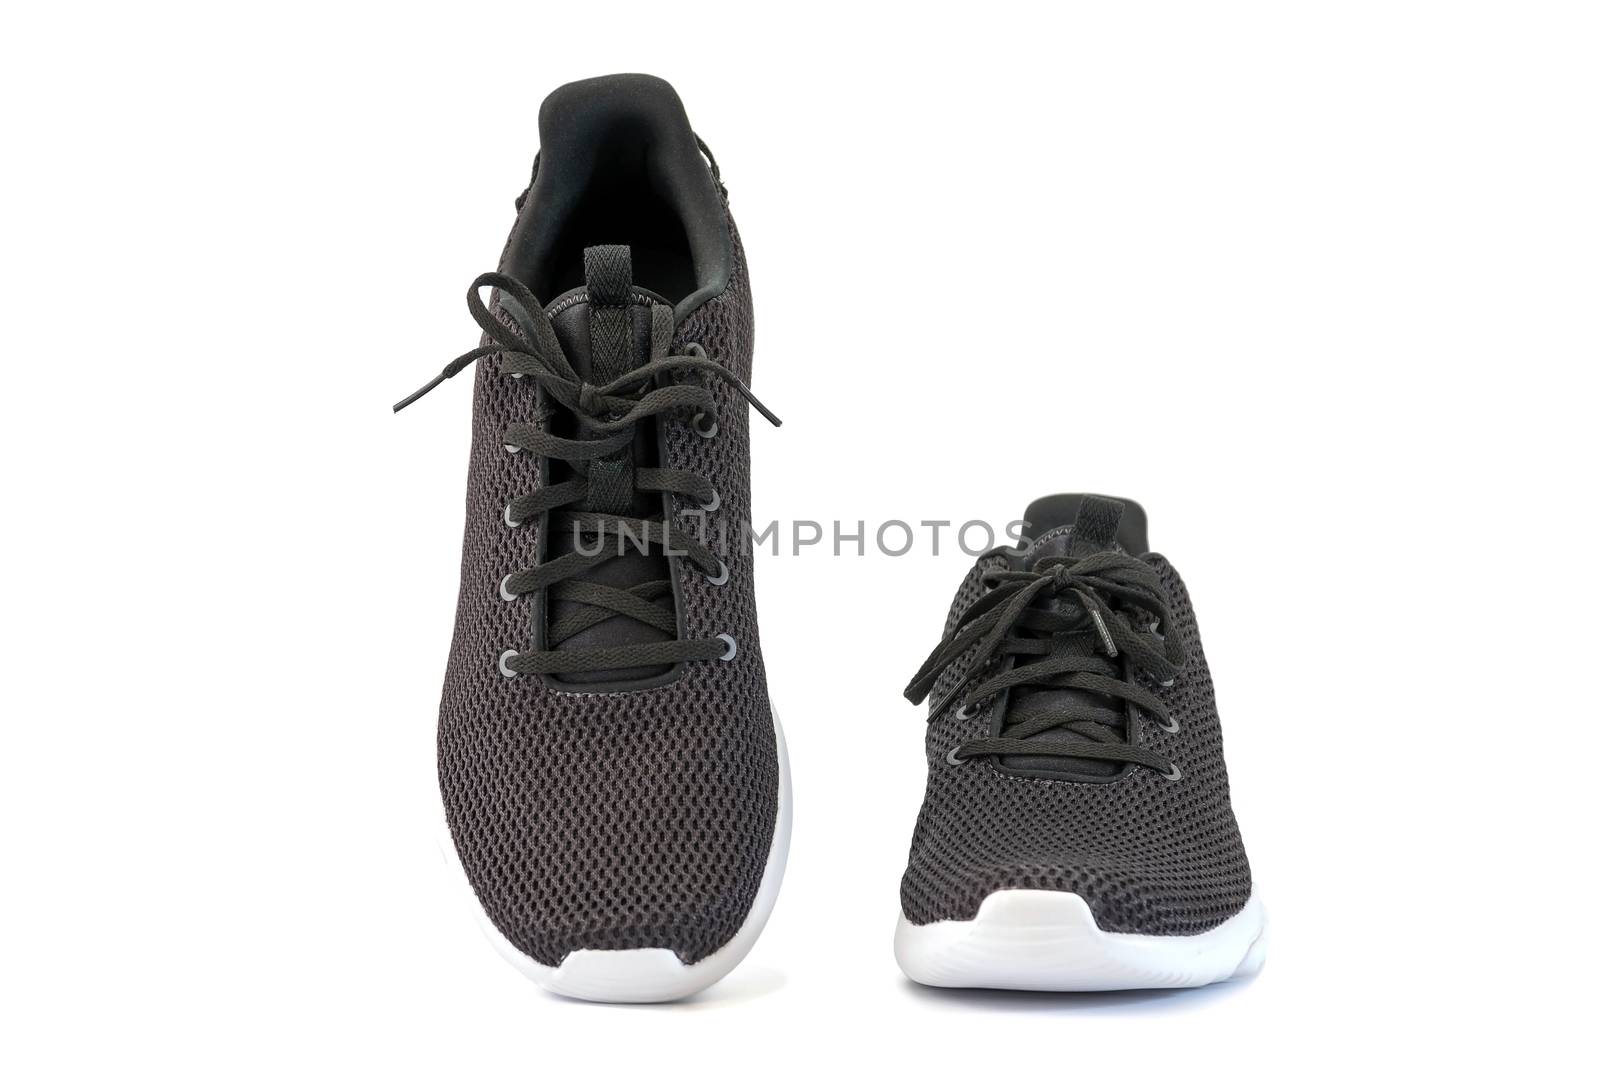 Black sneakers running shoes isolated  by wattanaphob